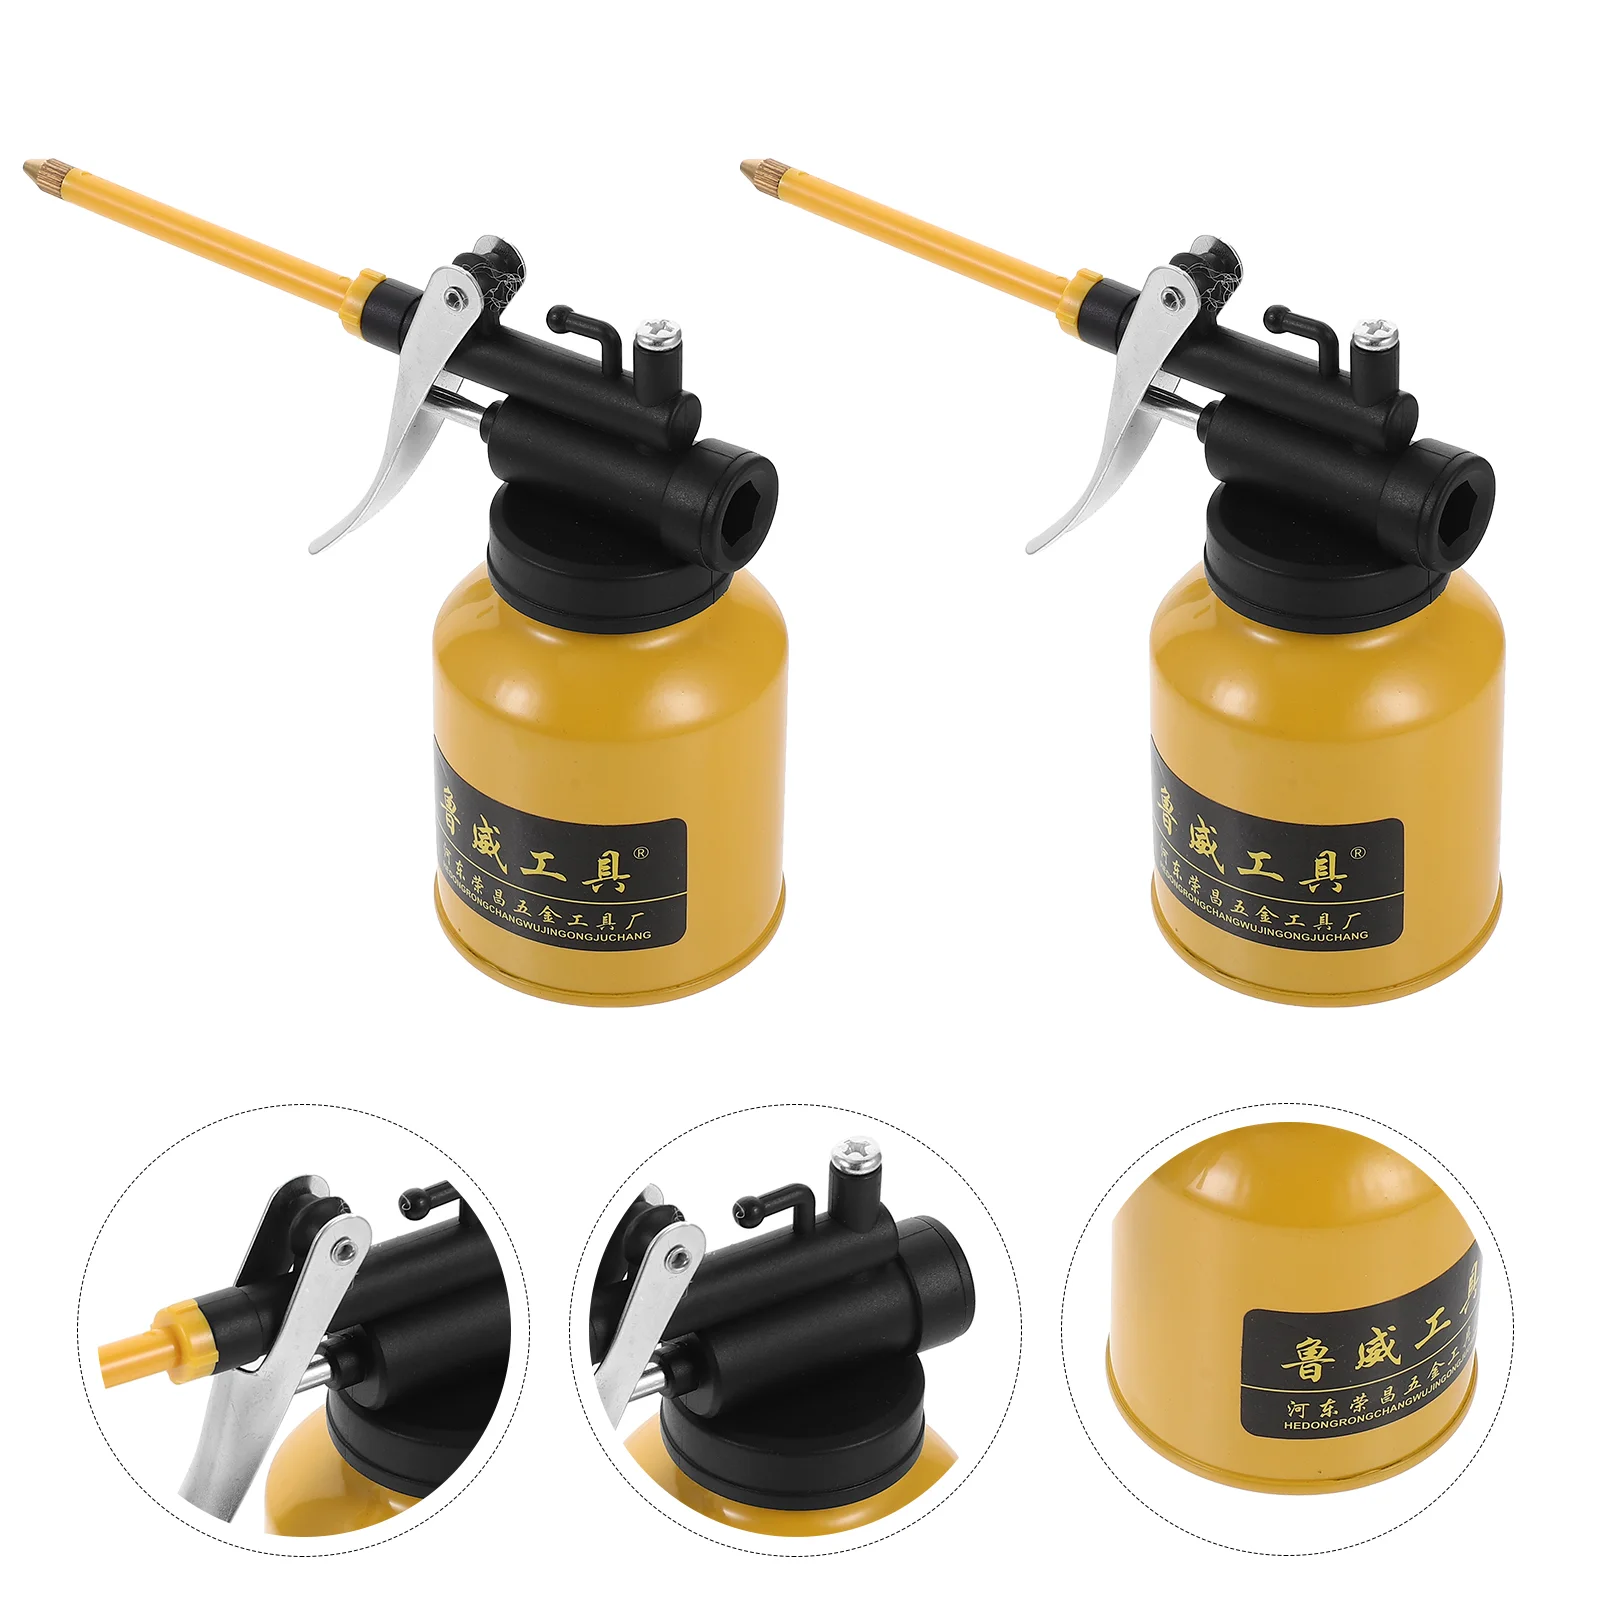 

2Pcs Industrial Pump Oiler Metal Oil Pump Can High Pressure Squeeze Oil Filling Pot with Spout for Oil Systems Storage 250ml (